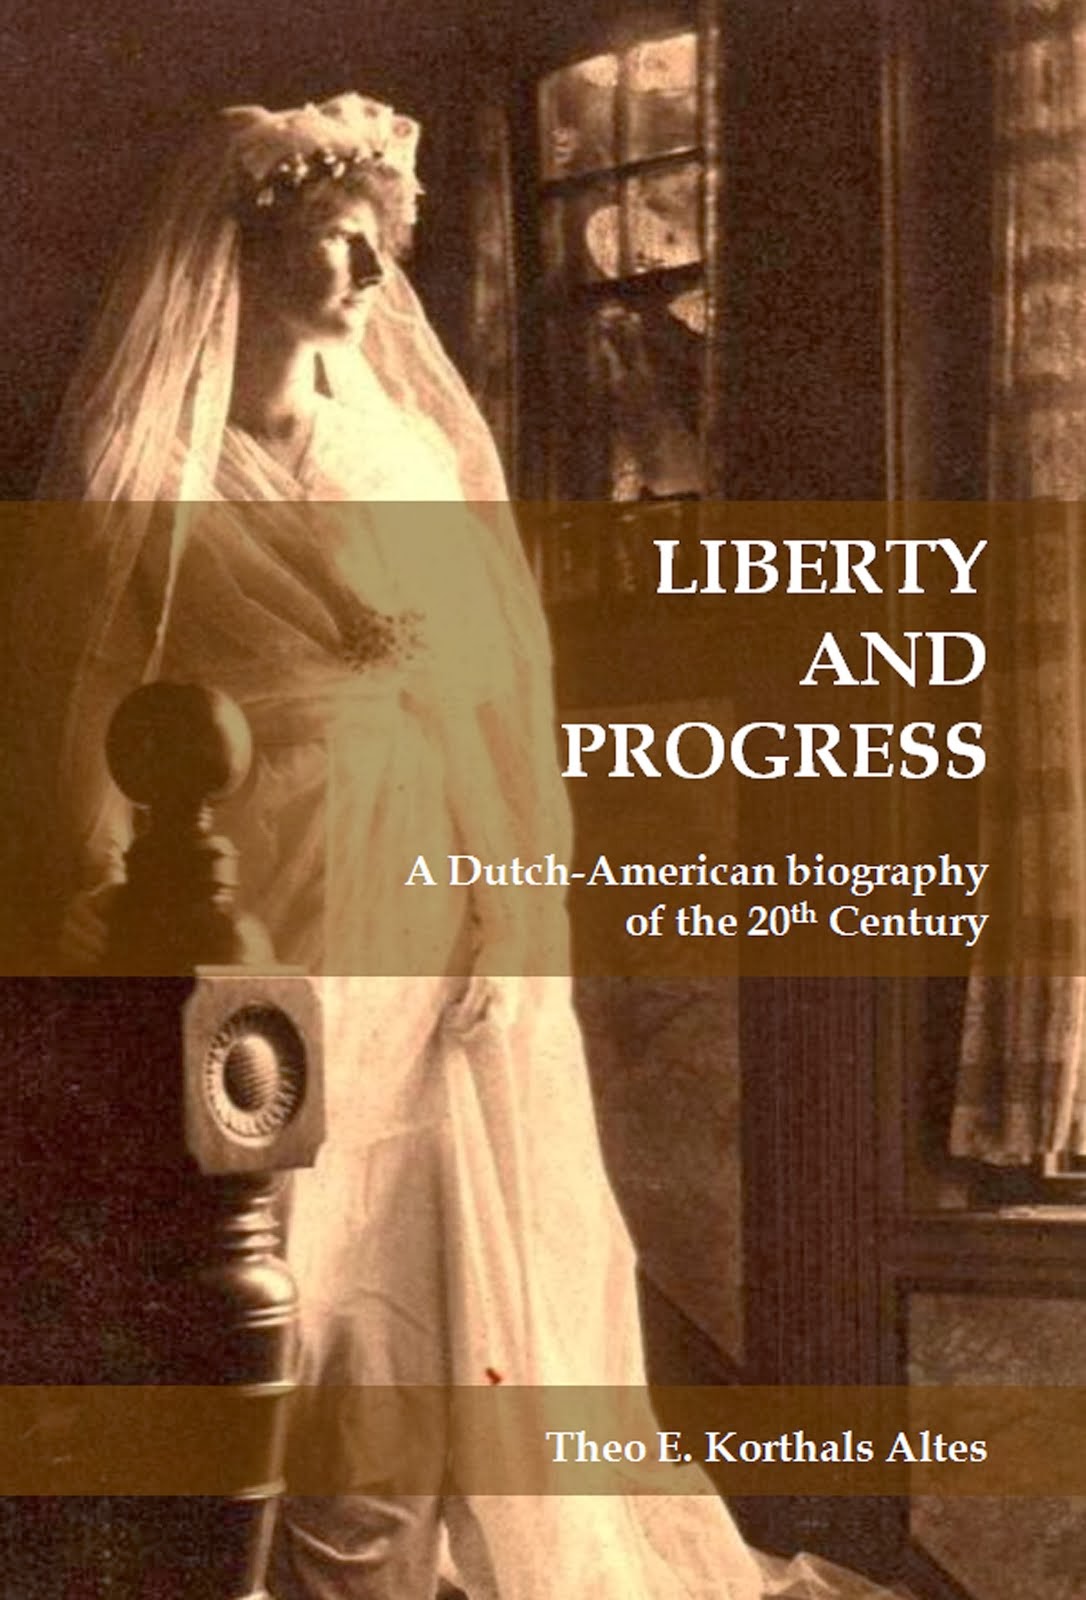 Lieberty and Progress - A Dutch-American biography of the 20th Century (2012)